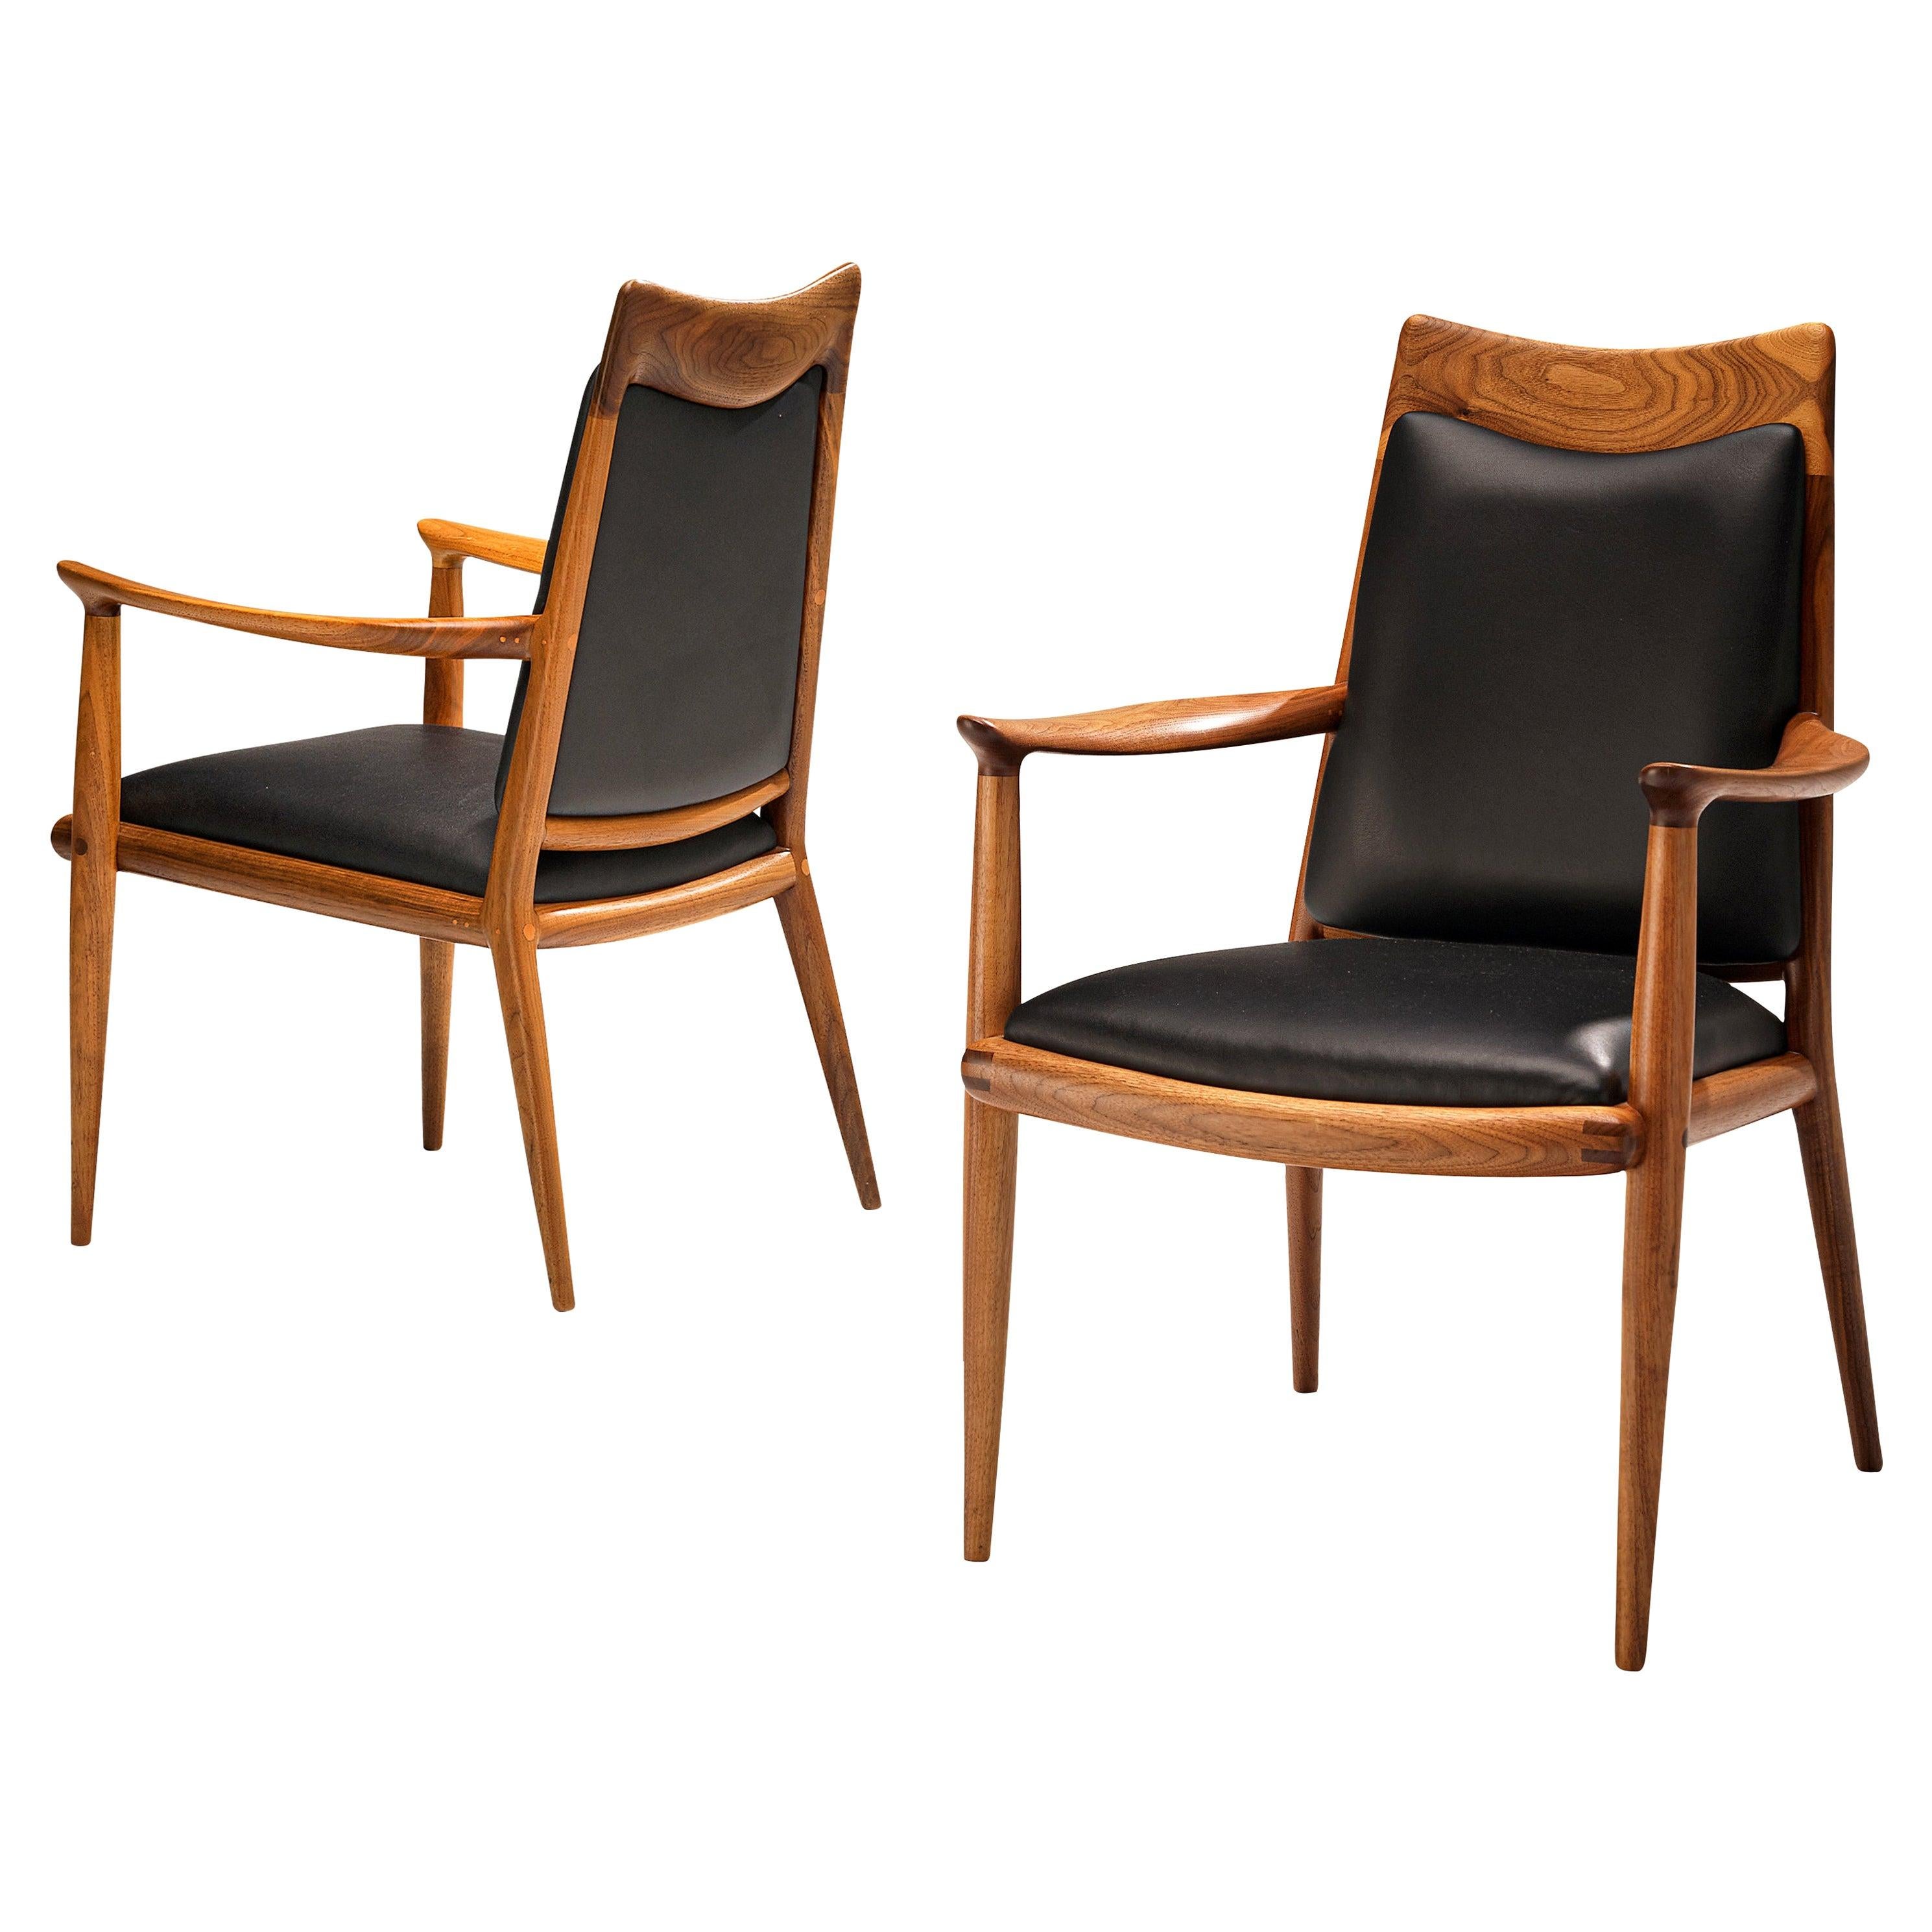 Sam Maloof Handcrafted Armchairs in Walnut and Black Leather